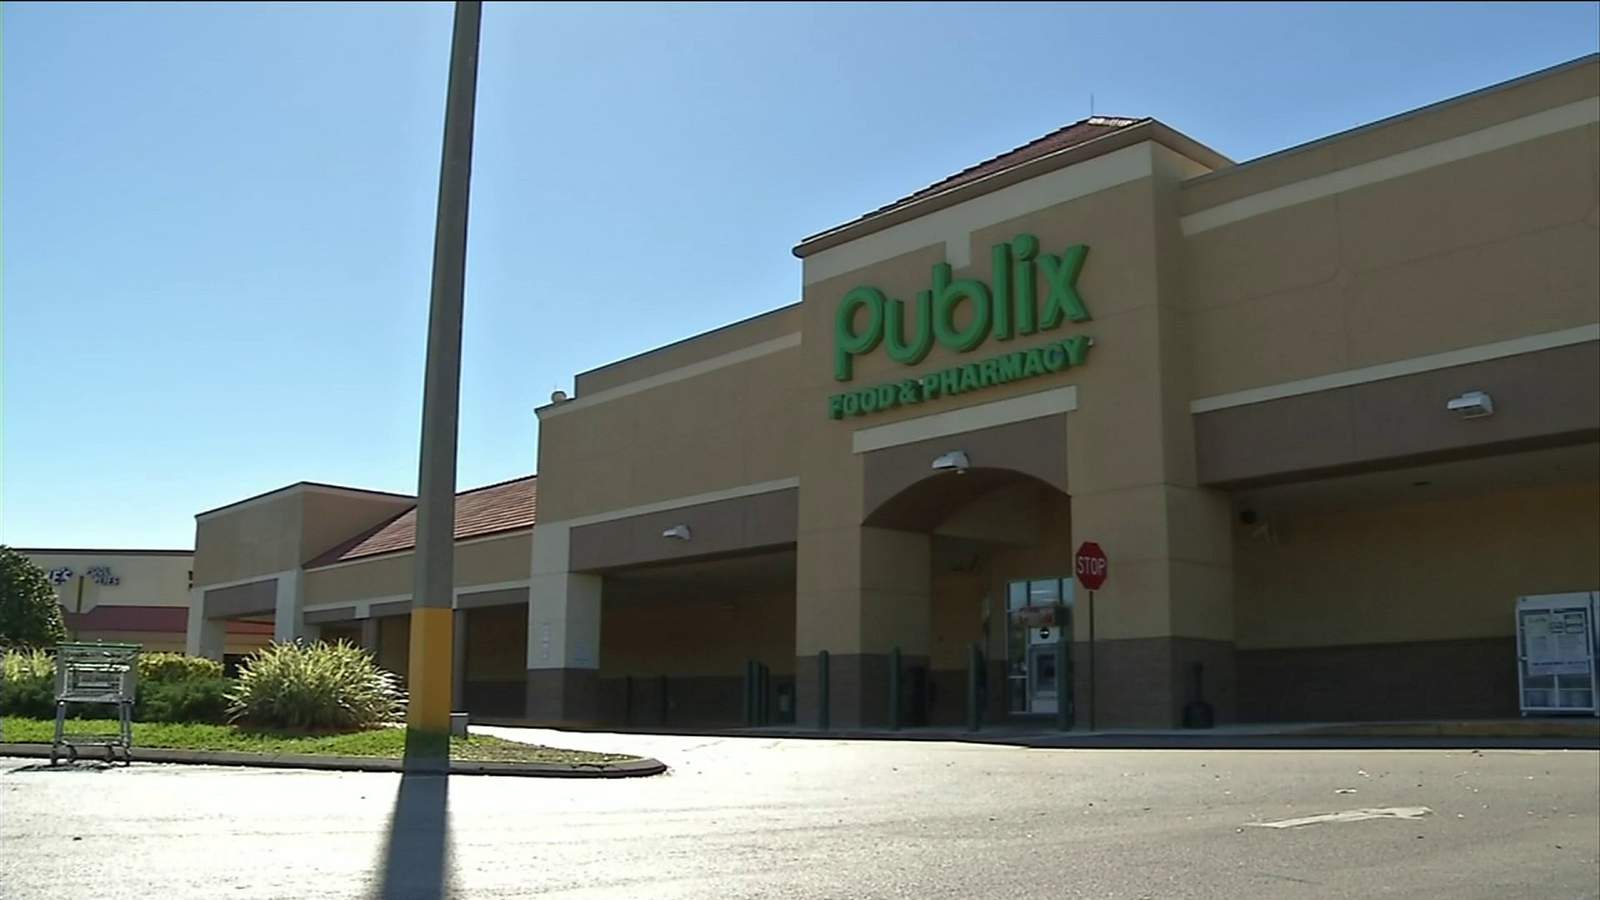 All Florida Publix locations will offer COVID-19 vaccine